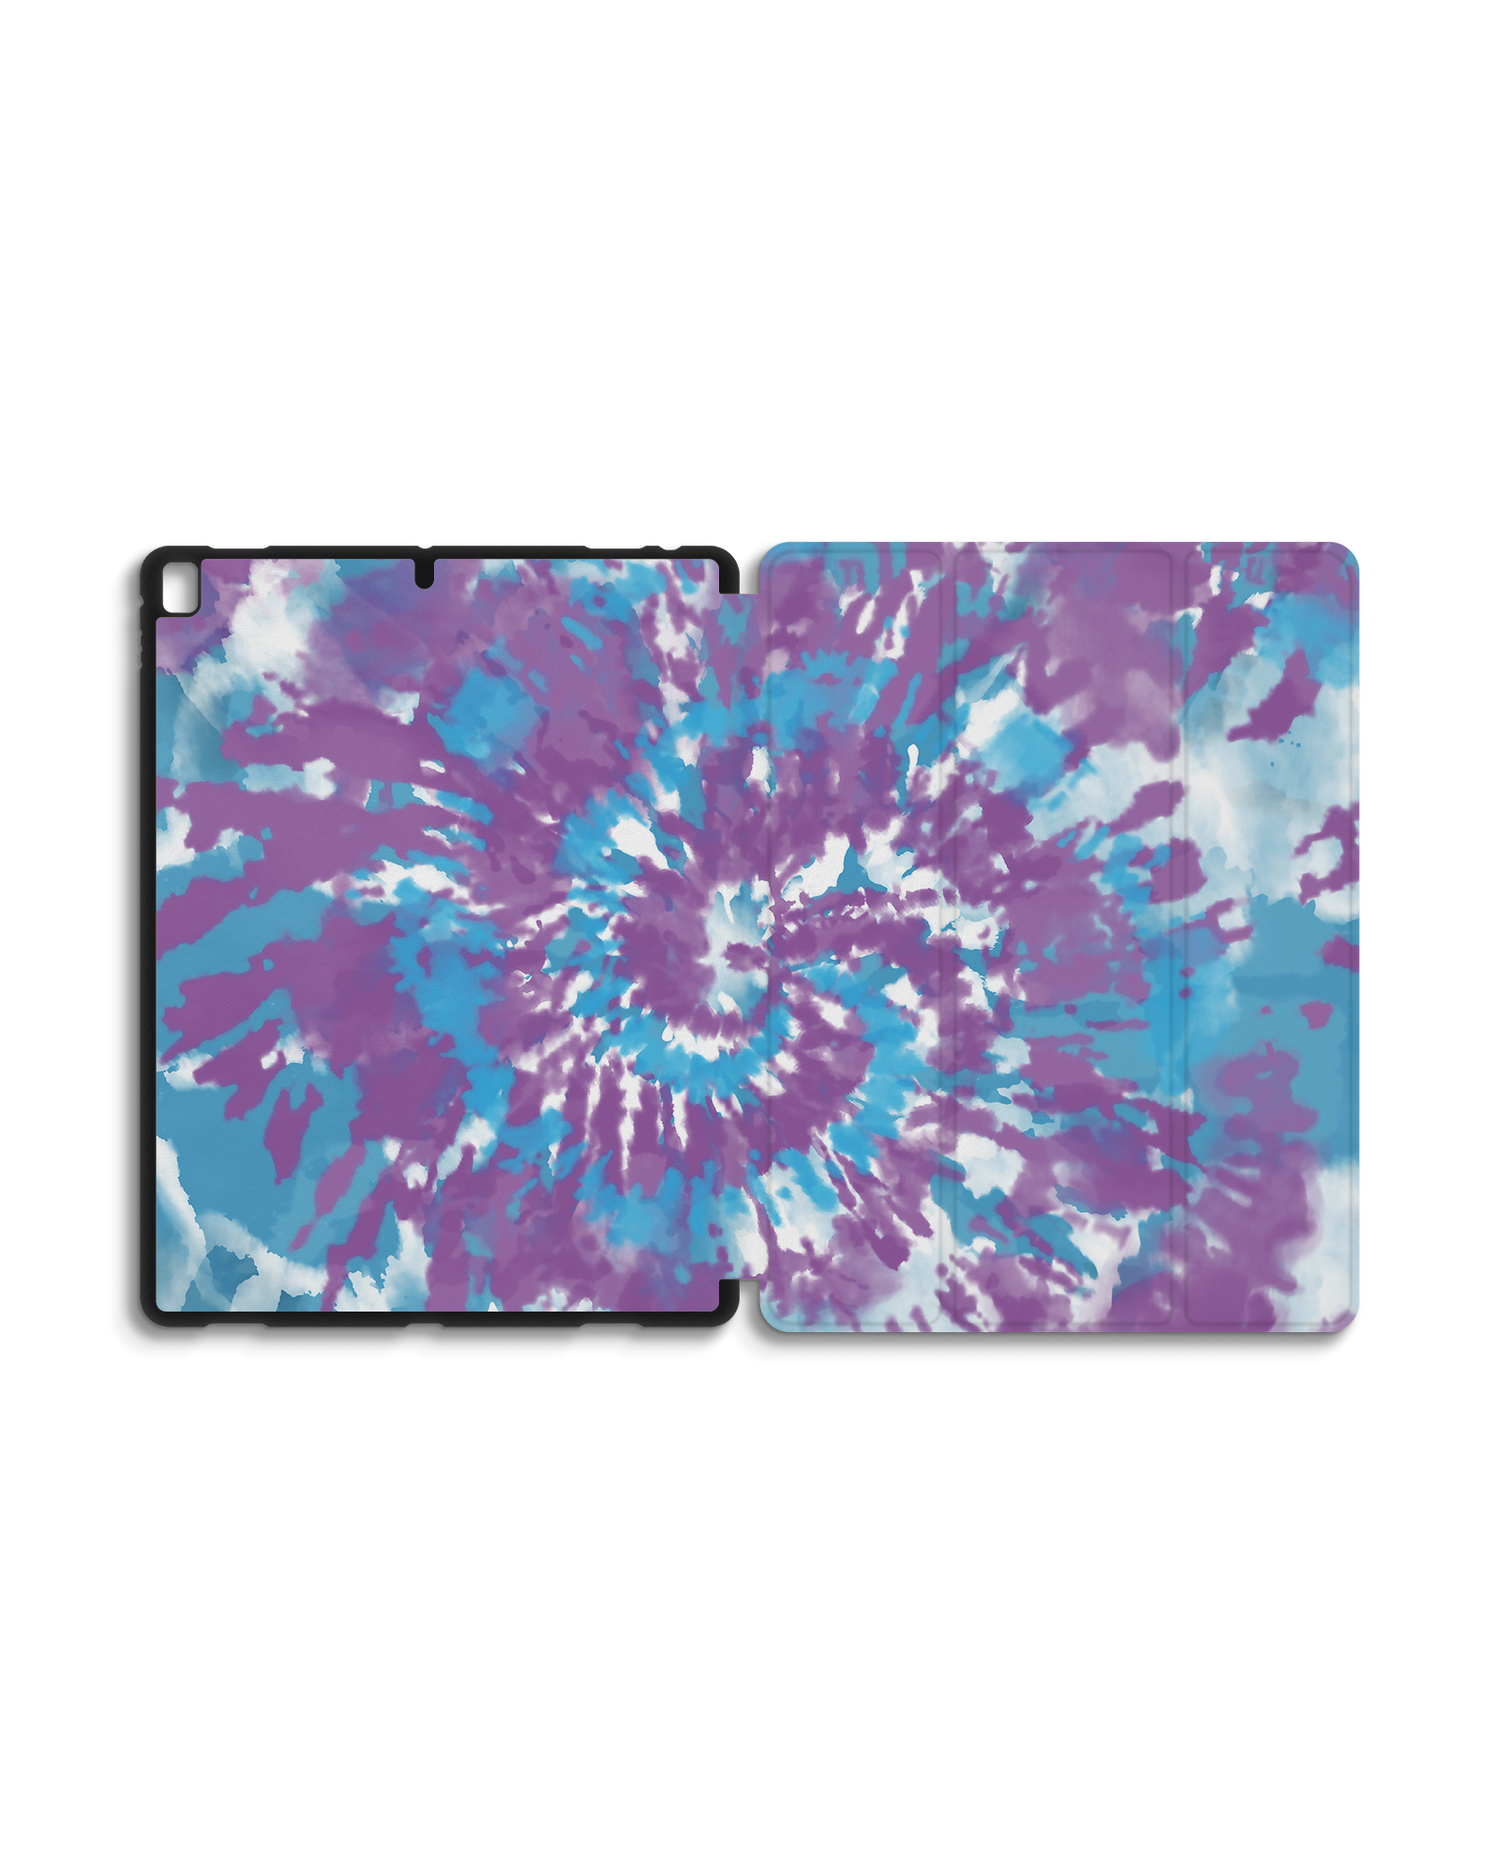 Classic Tie Dye iPad Case with Pencil Holder for Apple iPad Pro 2 12.9